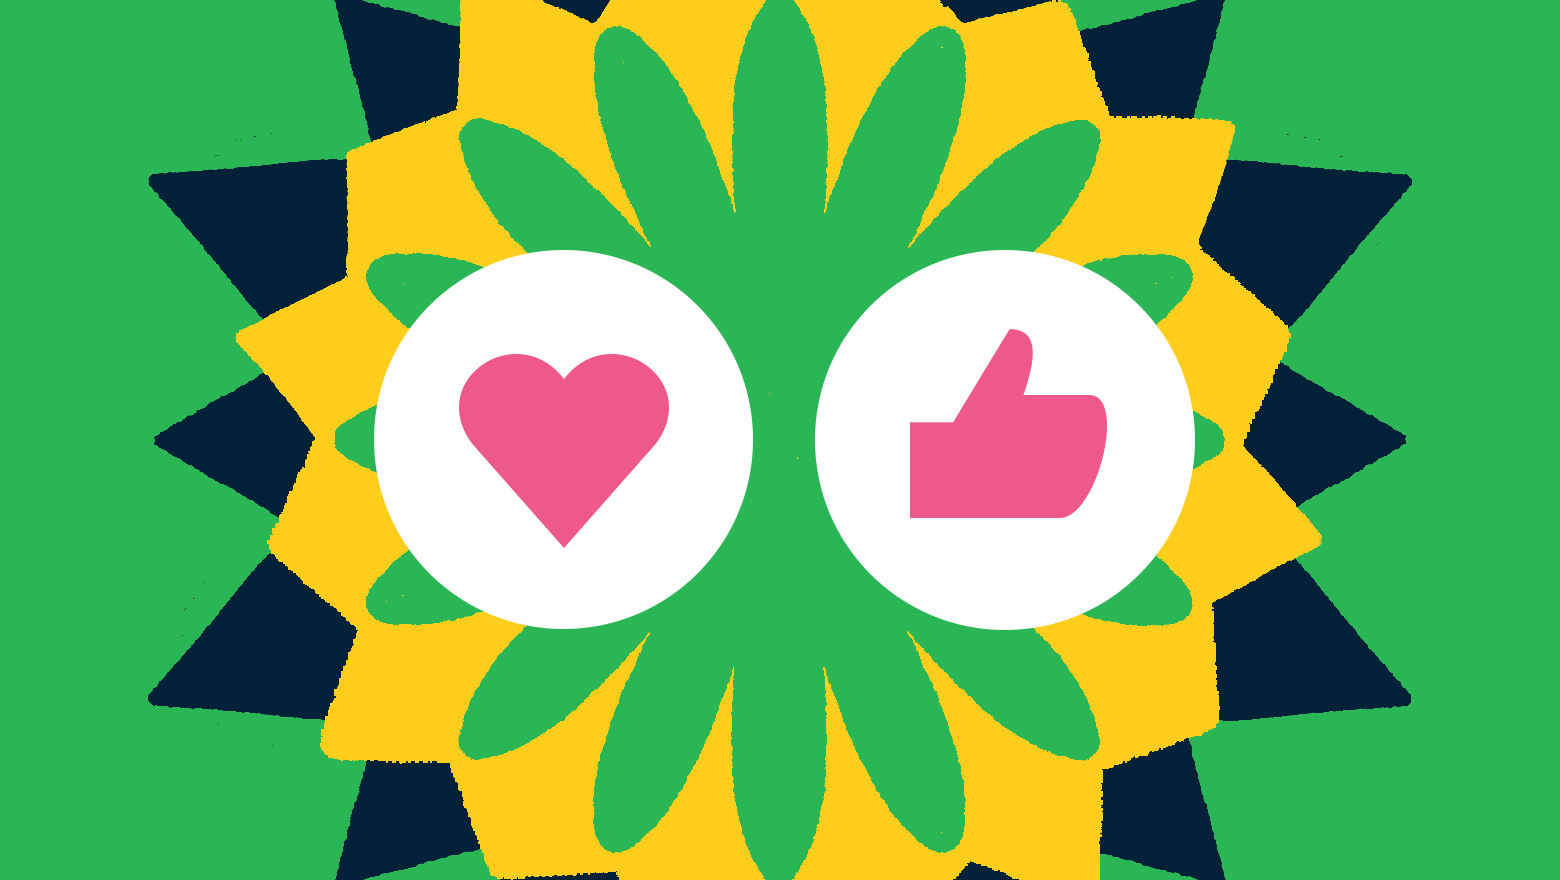 A green background with a starburst emblem and two reaction emojis